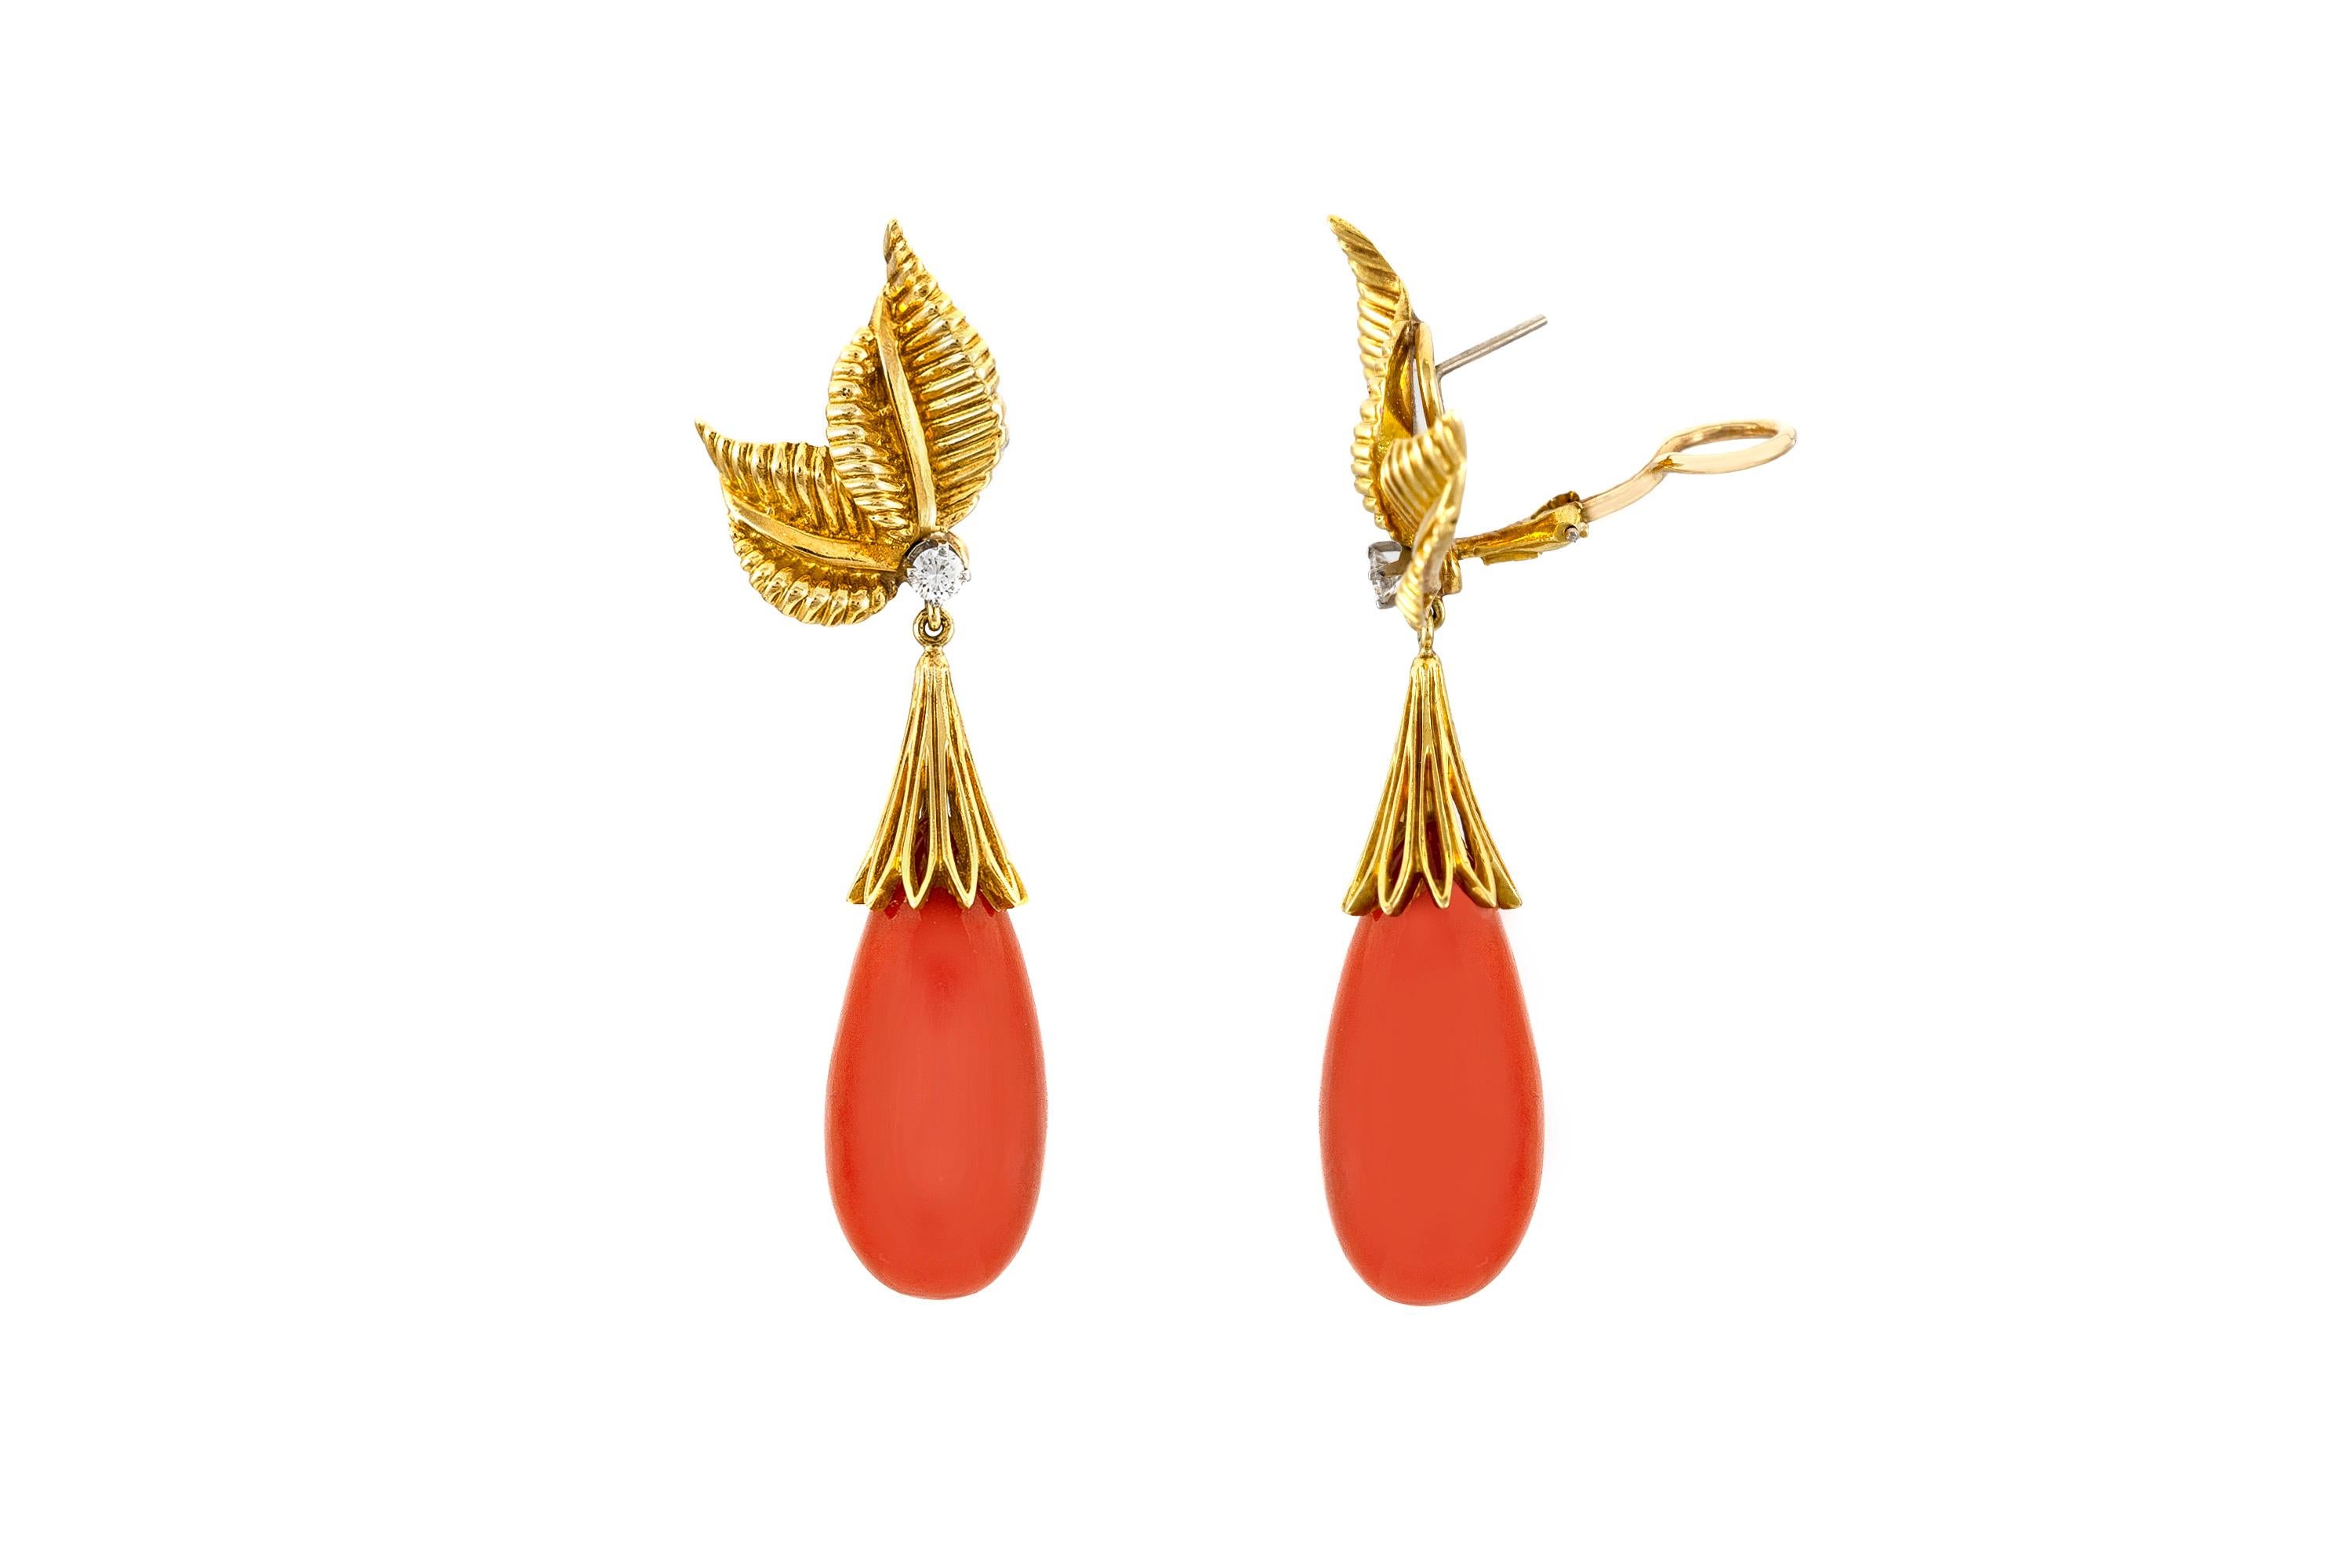 The earrings are finely crafted in 18k yellow gold With two small diamonds weighing approximately total of 0.20 carat and two drop coral.
Circa 1950.